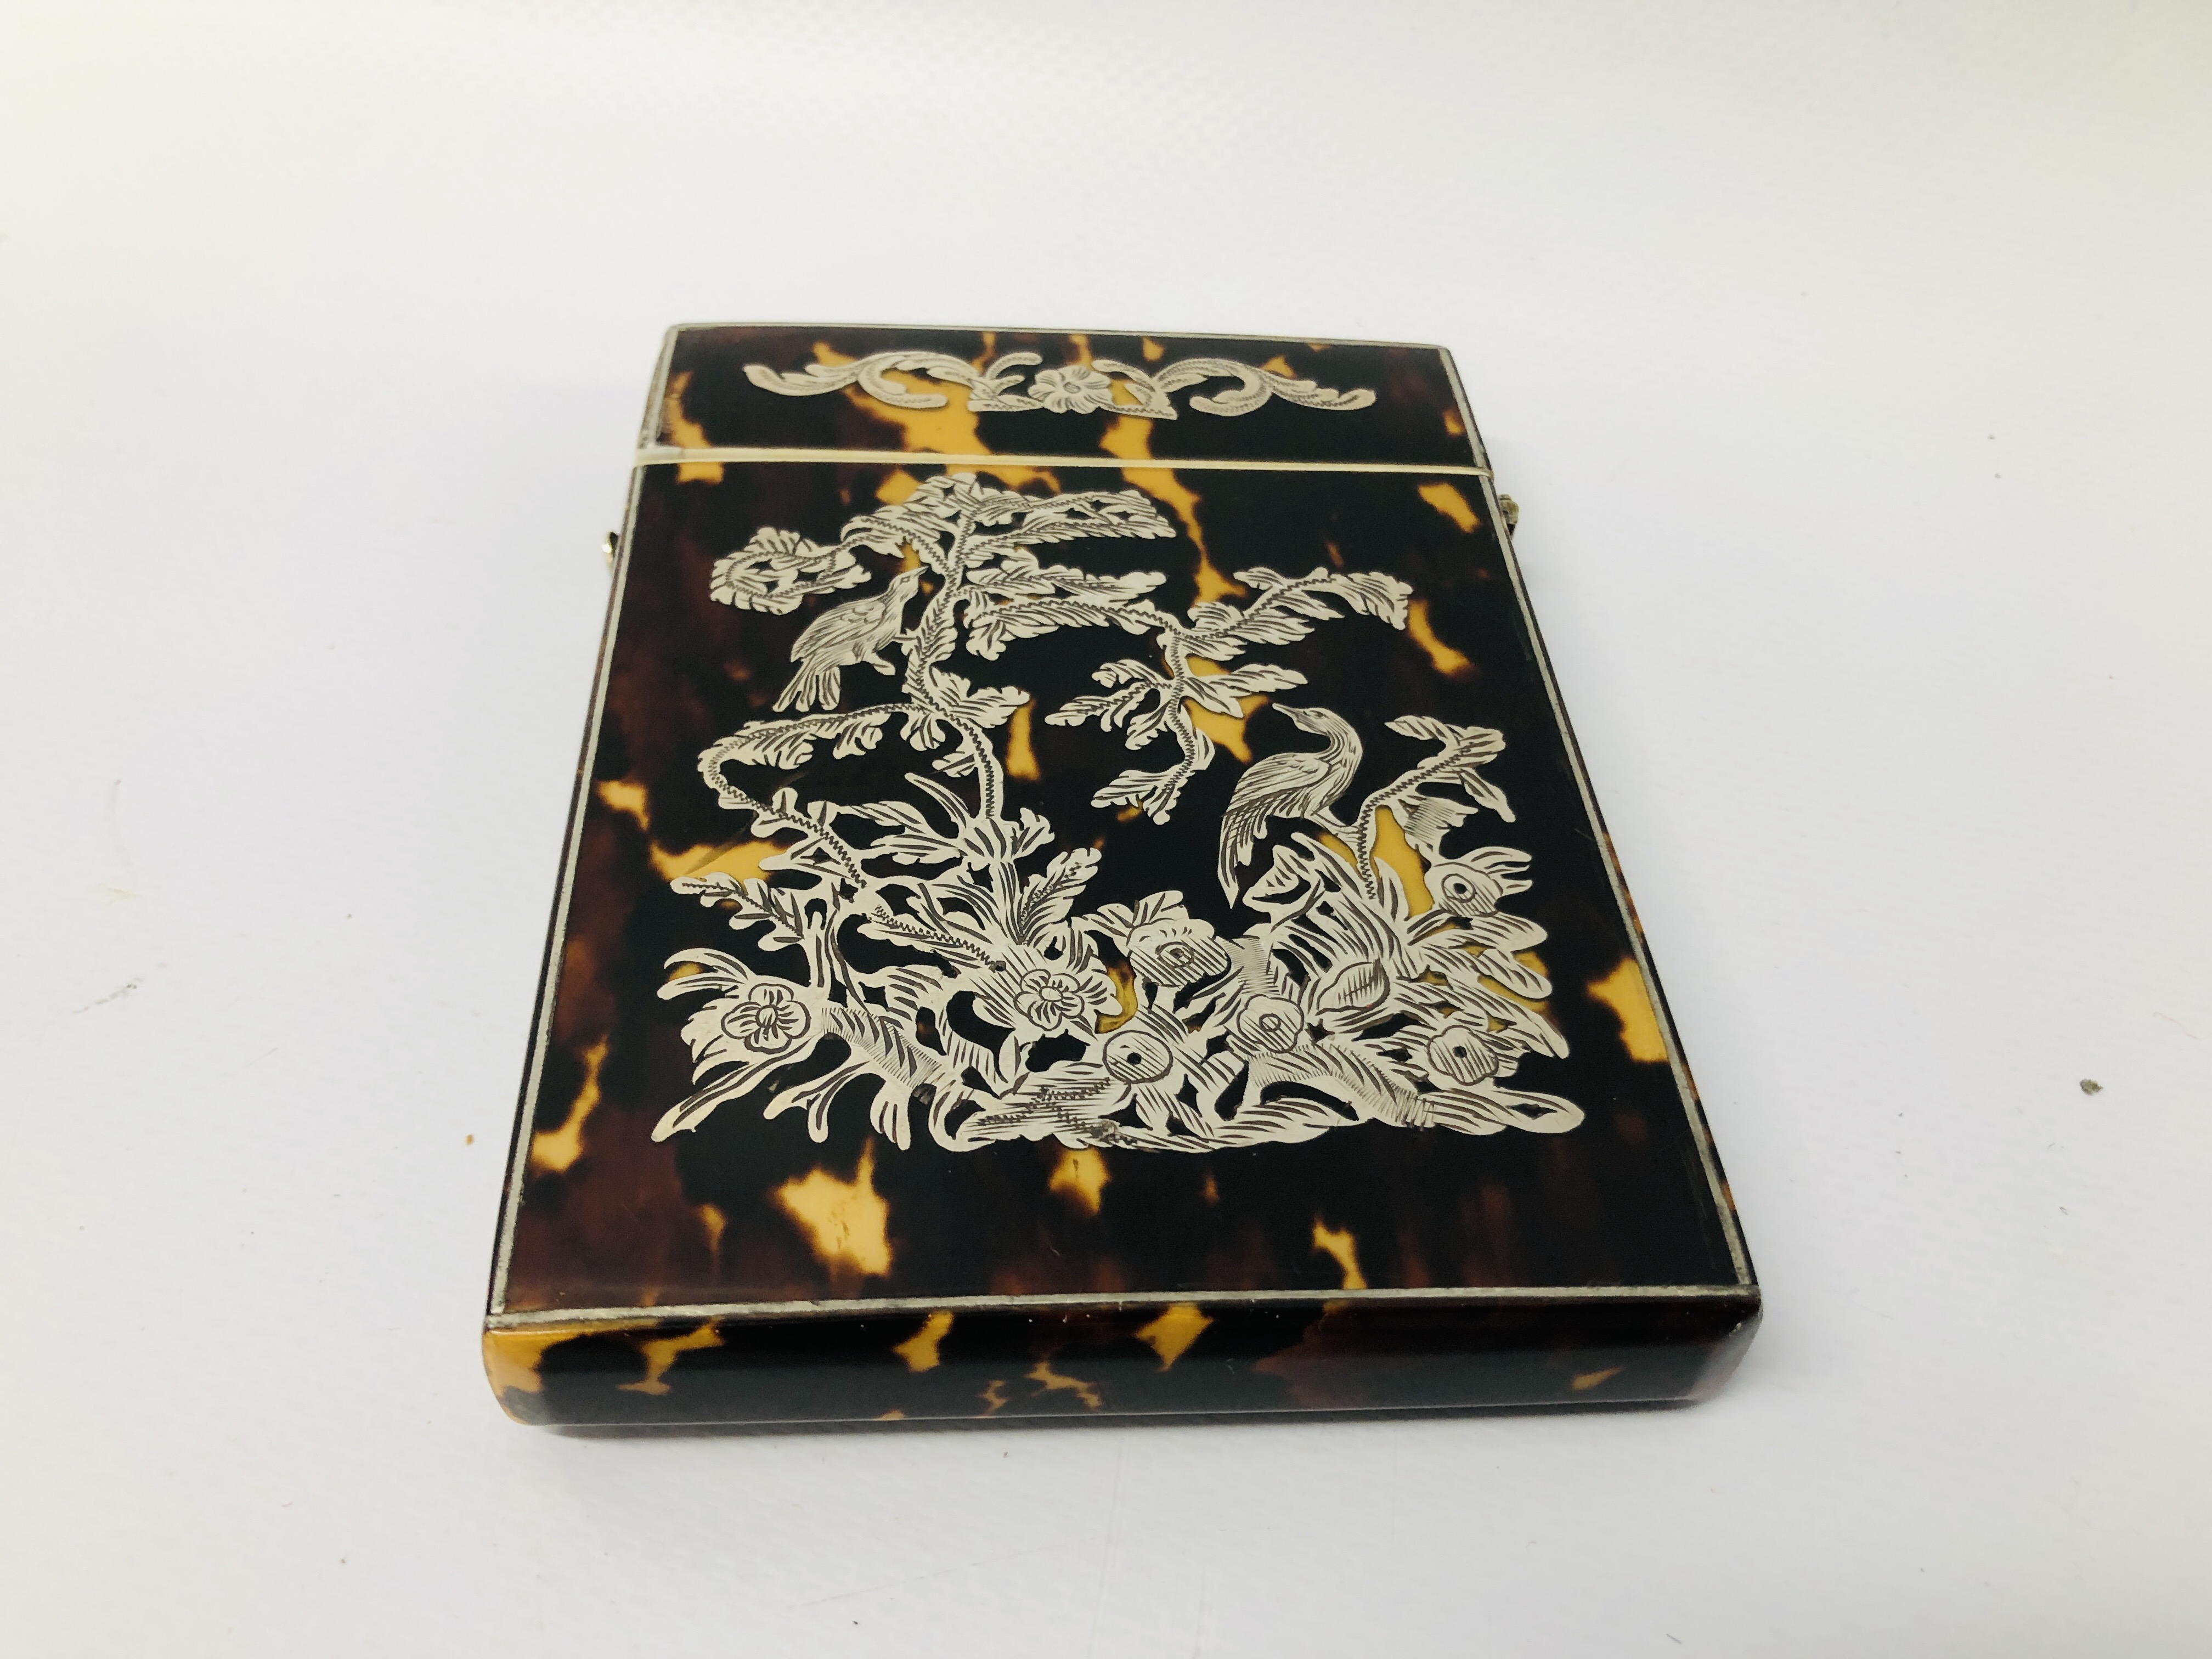 ANTIQUE TORTOISE SHELL SILVER INLAID CARD CASE. - Image 7 of 7